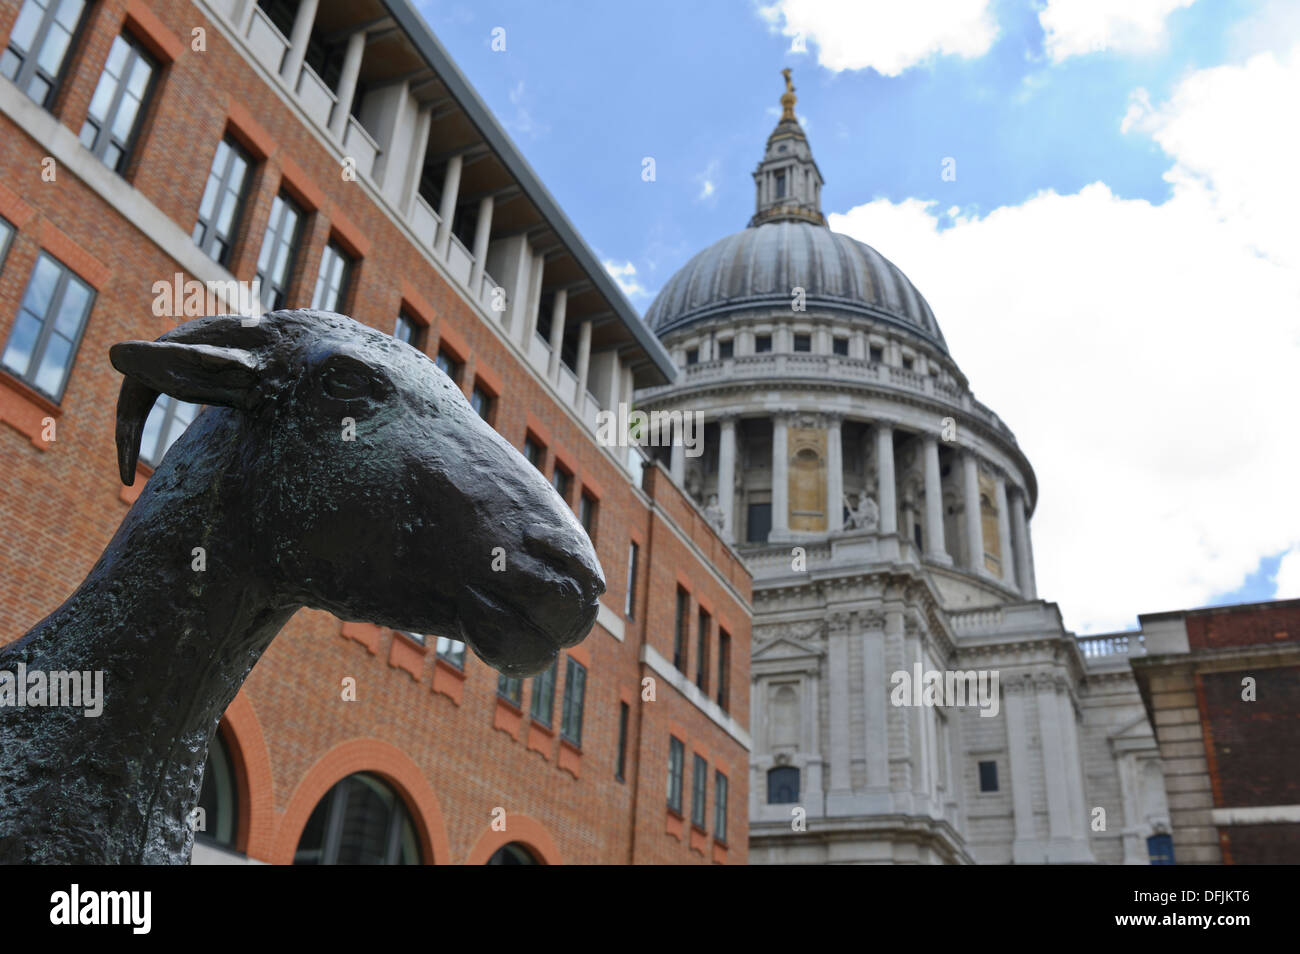 Iconic dome of St Paul's Cathedral, London, England, United Kingdom. Stock Photo